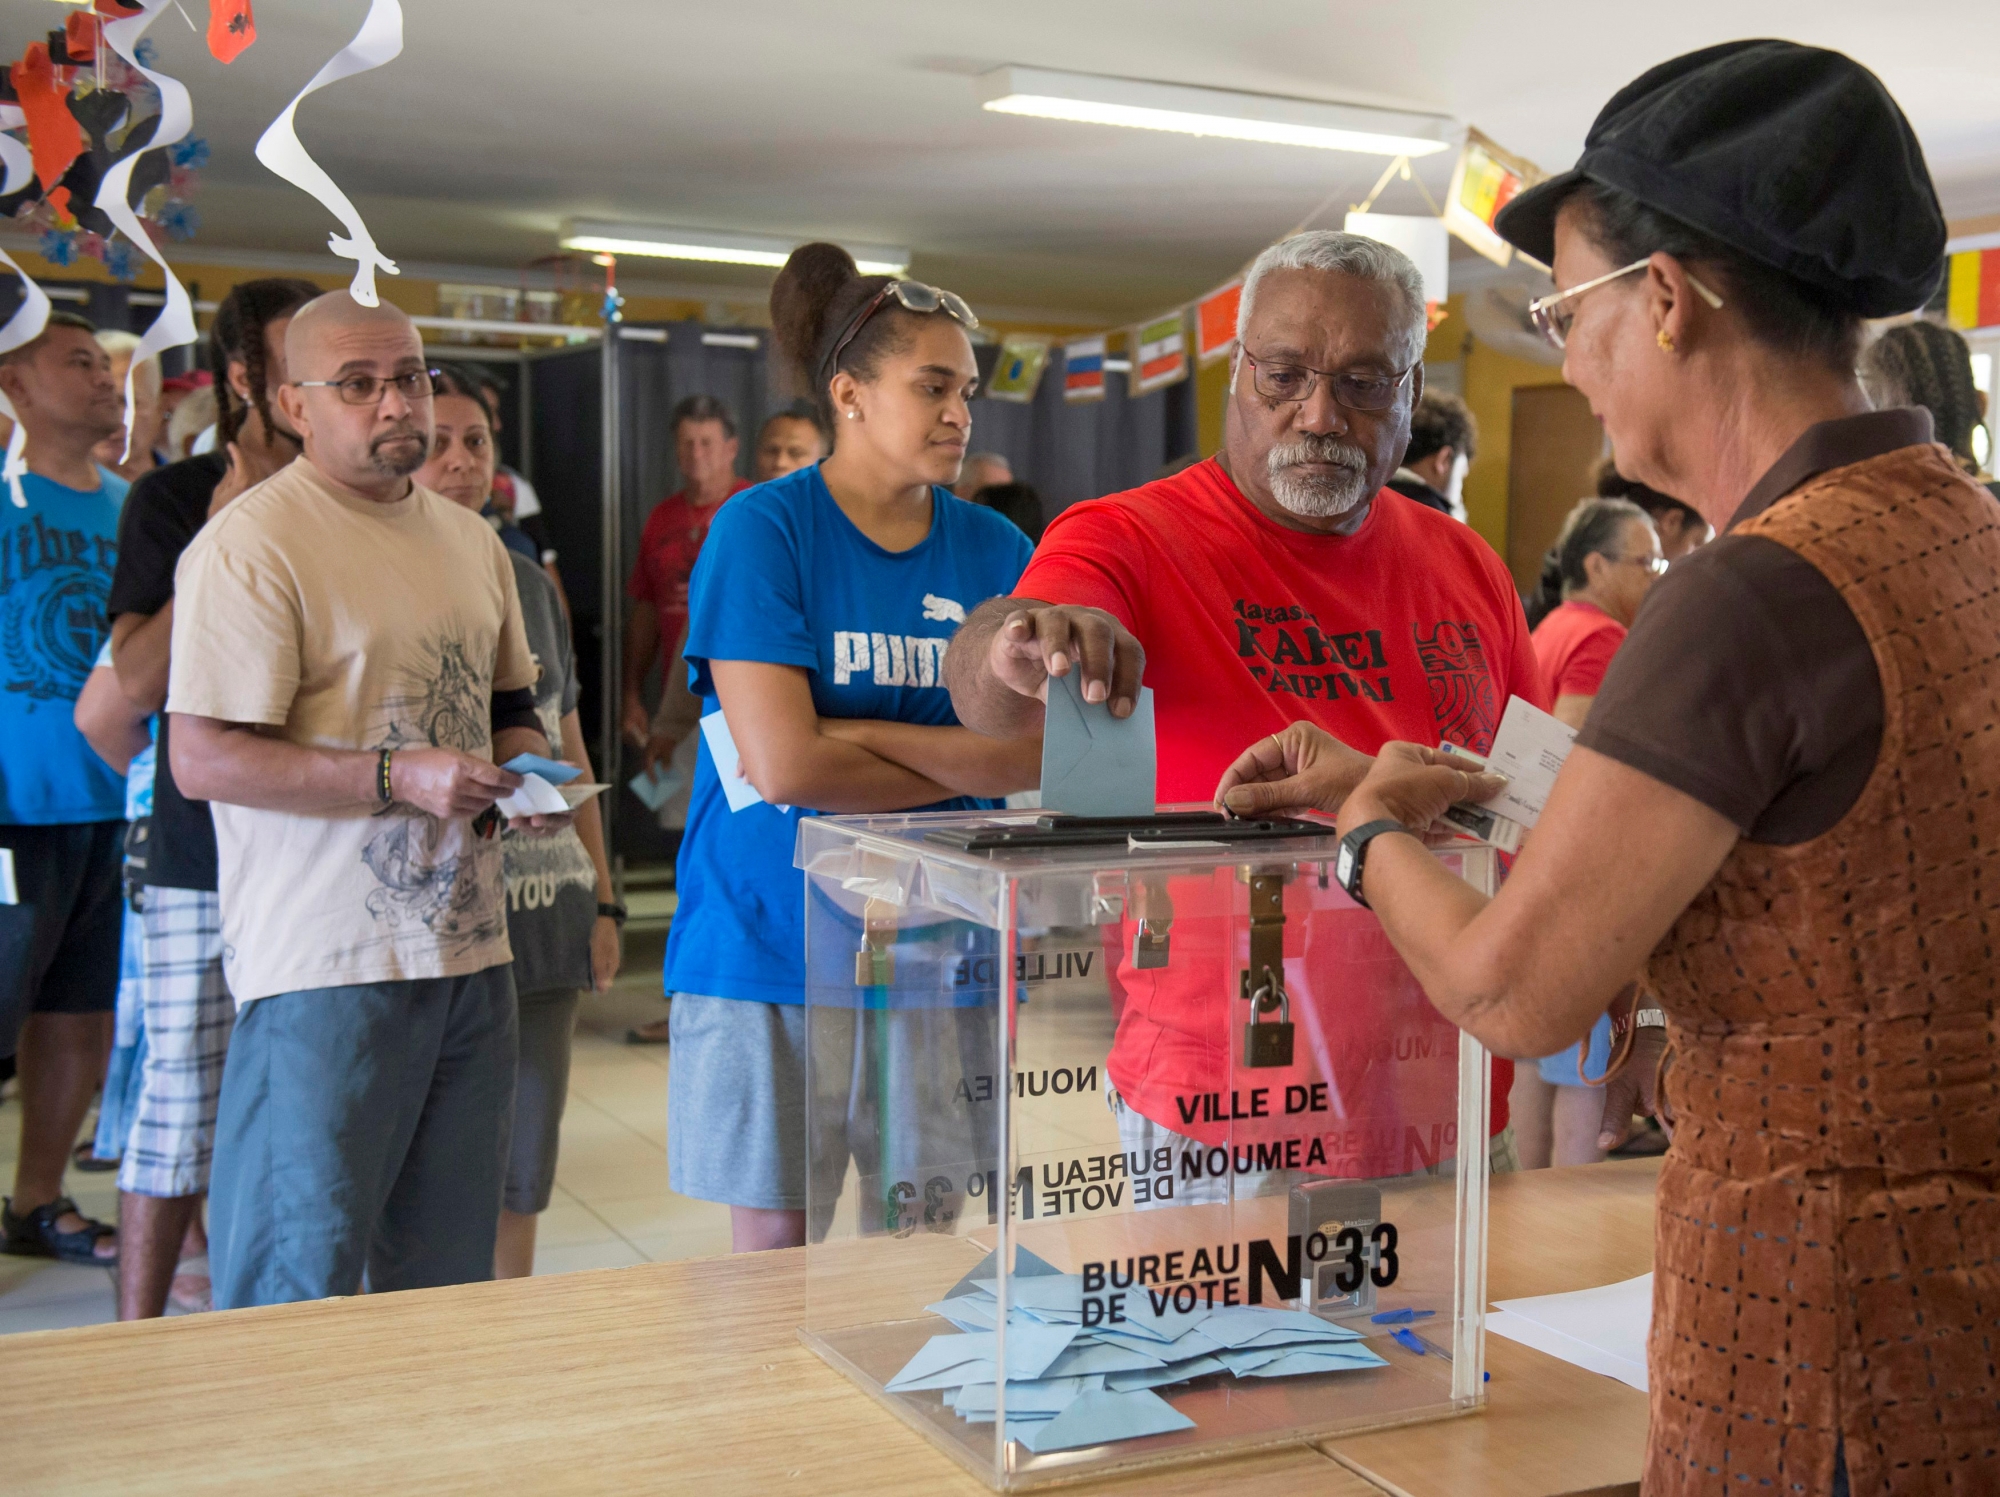 A man casts his vote at a polling station in Noumea, New Caledonia, as part of an independence referendum, Sunday, Nov. 4, 2018. Voters in New Caledonia are deciding whether the French territory in the South Pacific should break free from the European country that claimed it in the mid-19th century. (AP Photo/Mathurin Derel) New Caledonia Referendum